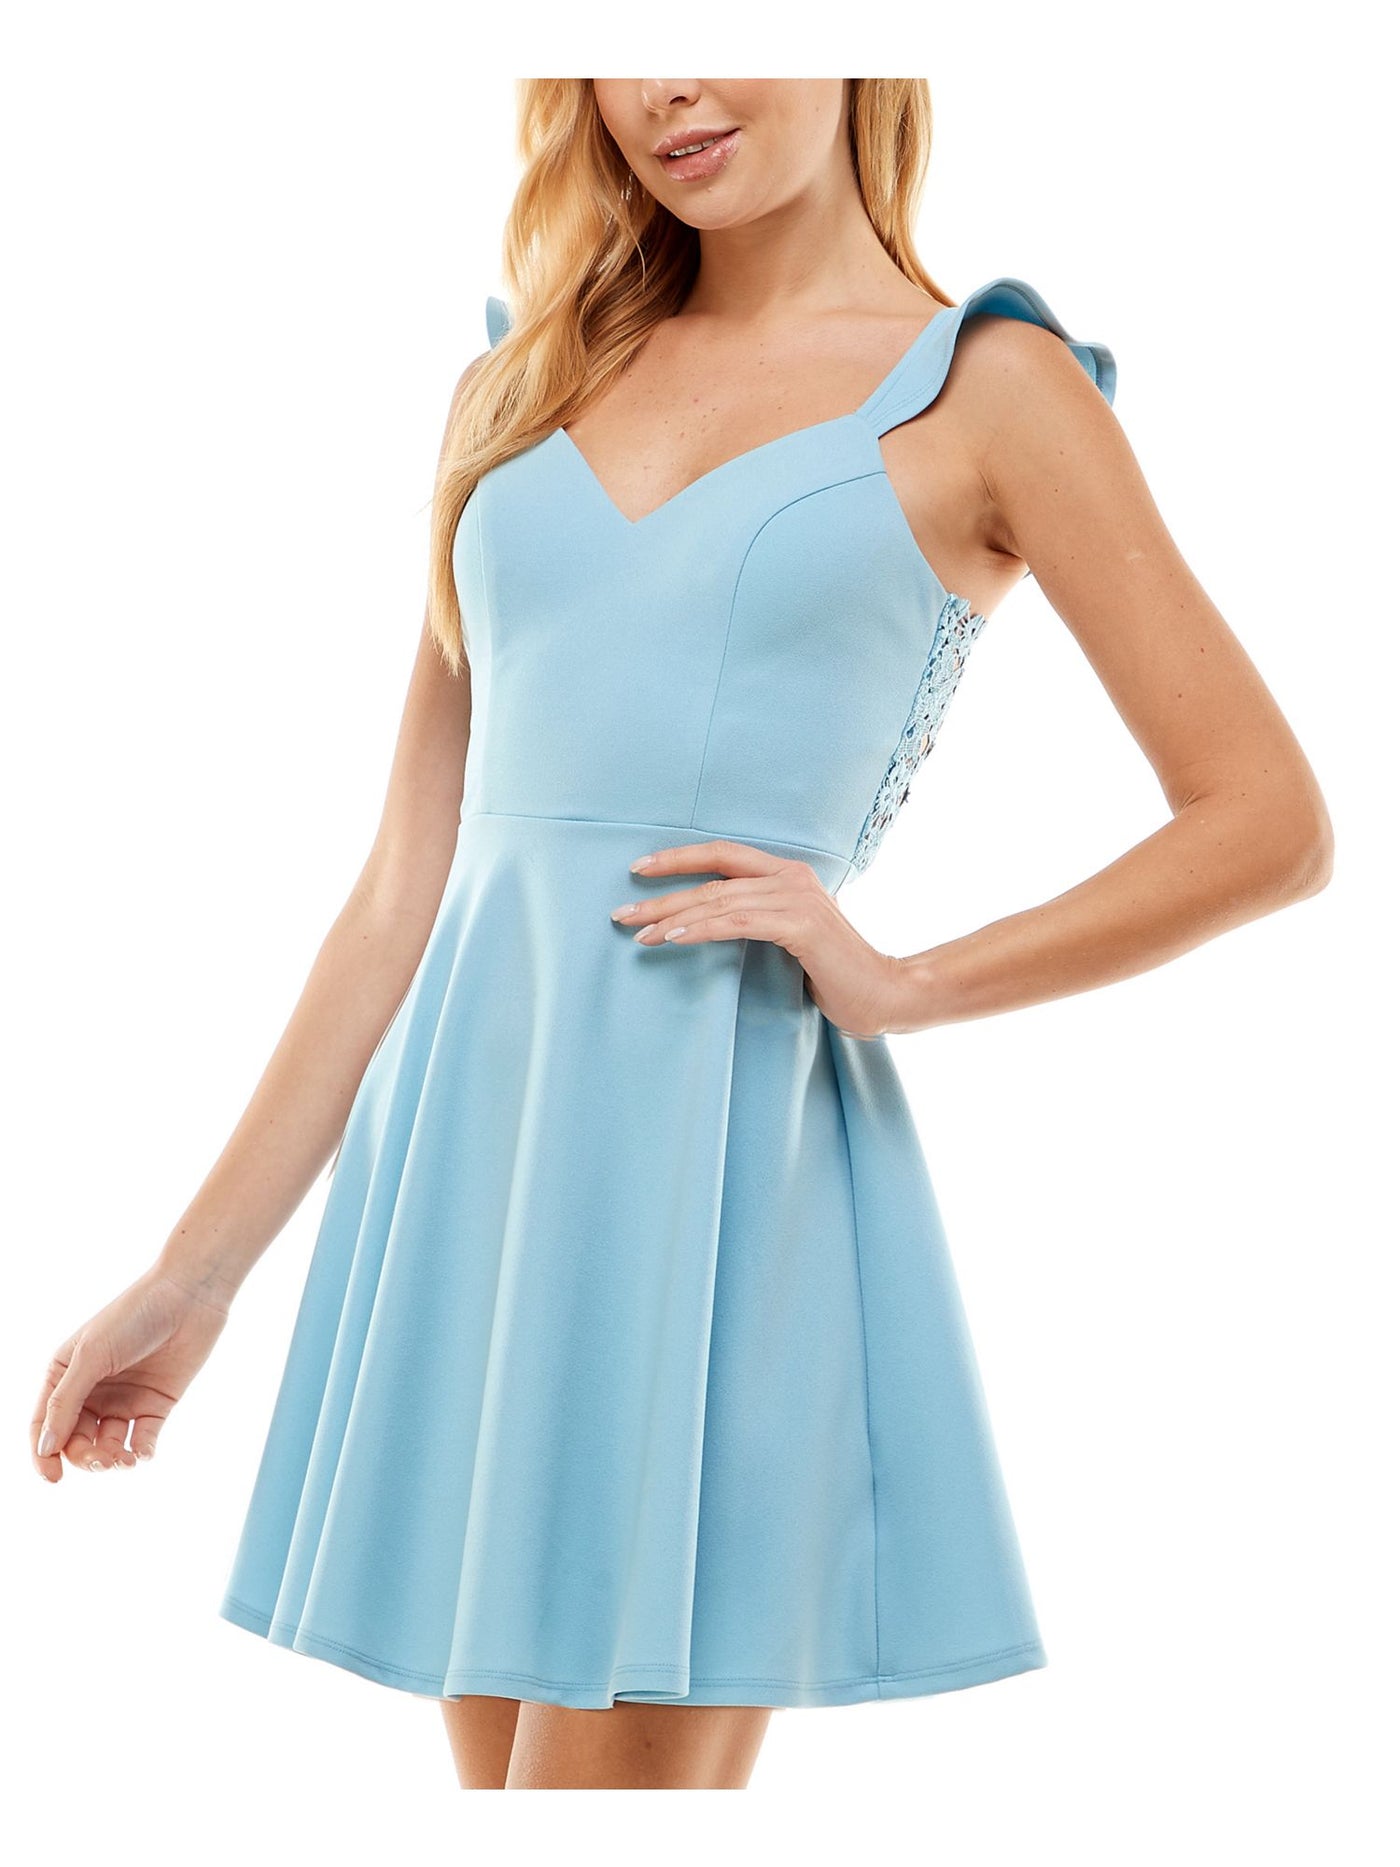 CITY STUDIO Womens Light Blue Zippered Ruffled Floral Lace Back Sleeveless Sweetheart Neckline Short Party Fit + Flare Dress Juniors 15